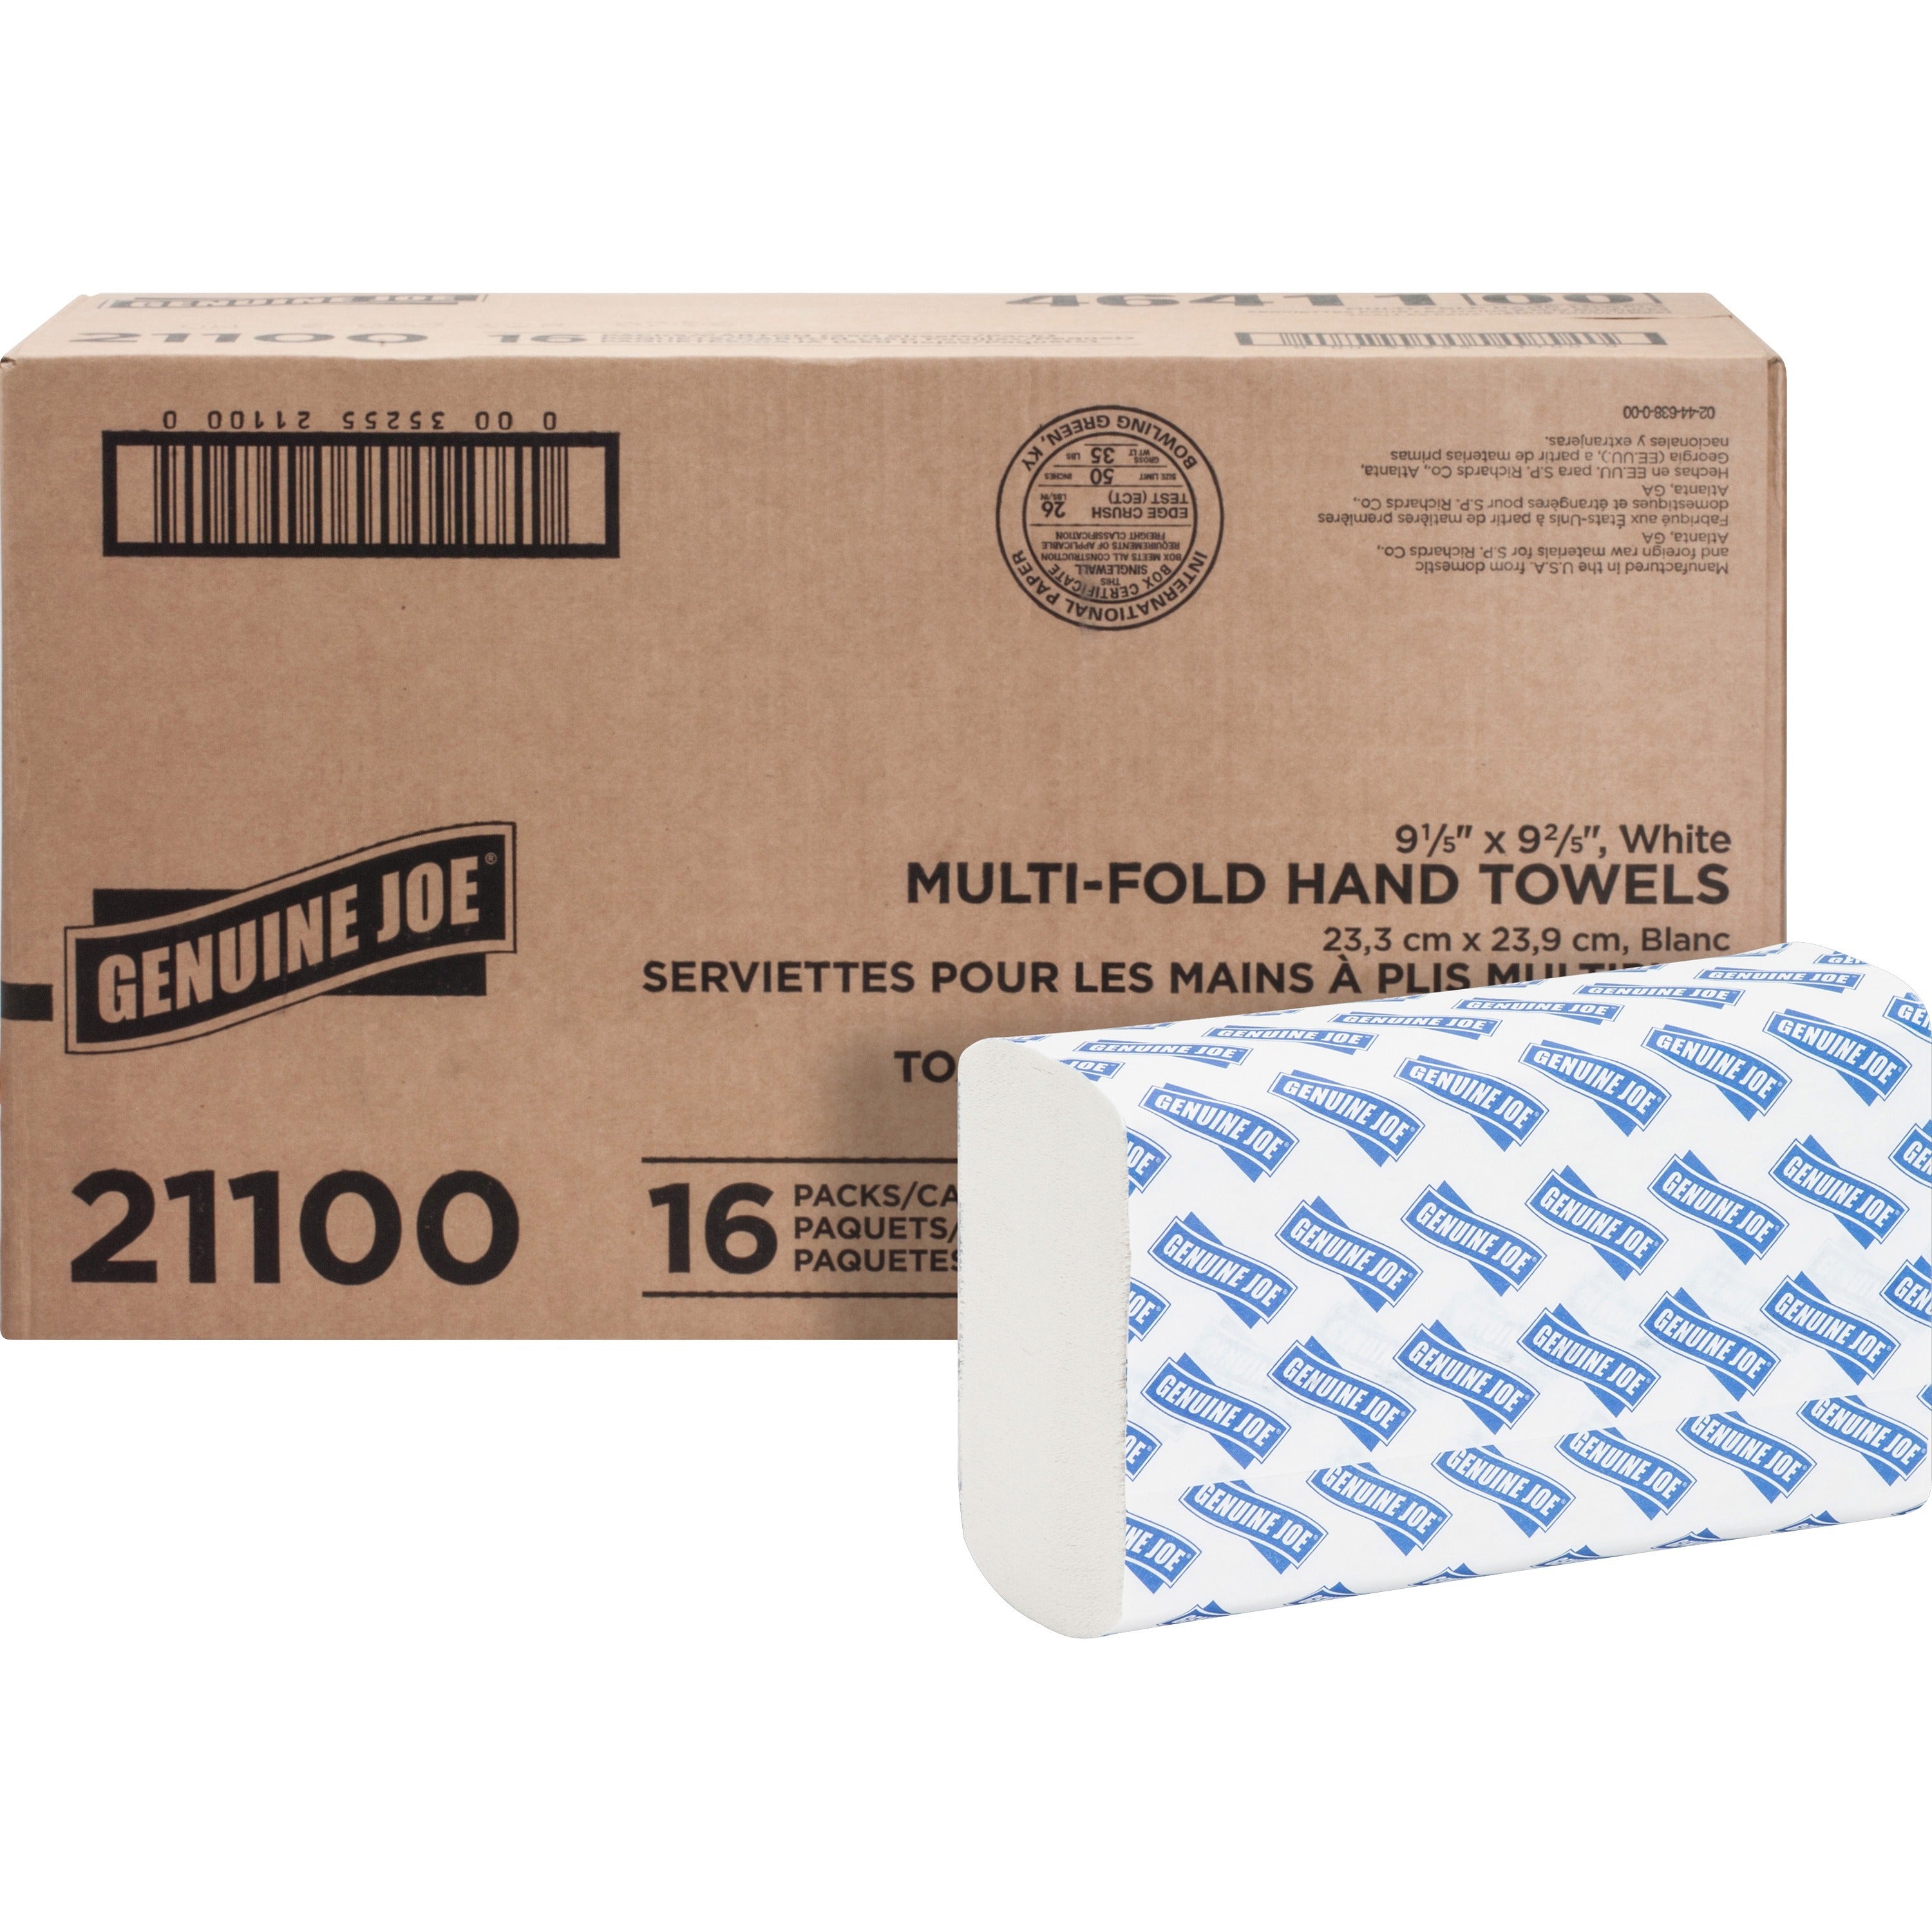 Genuine Joe Multifold Towels - 1 Ply - Multifold - 9.20" x 9.40" - White - Interfolded, Embossed, Anti-contamination, Chlorine-free, Absorbent, Moisture Resistant - For Restroom, Public Facilities, Washroom - 250 Per Bundle - 16 / Carton - 